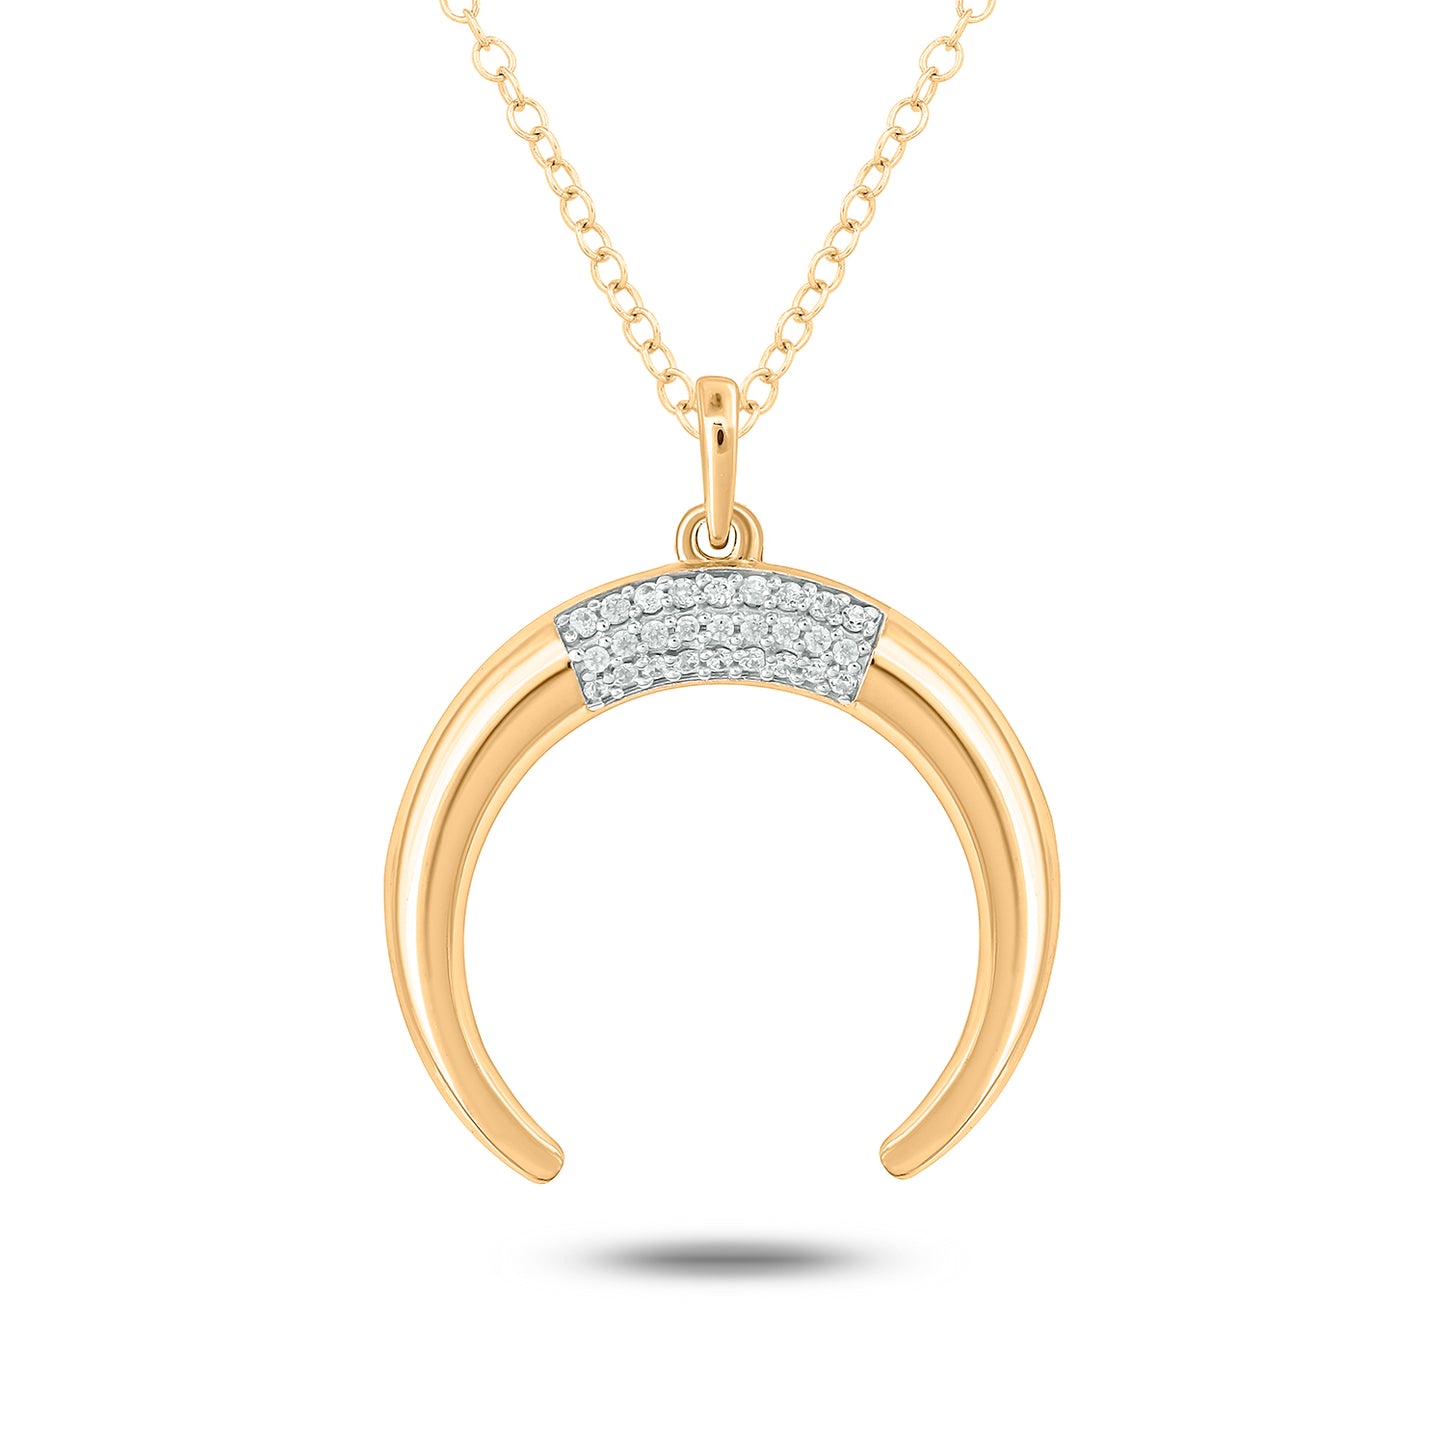 Crescent Moon Diamond Pendant Necklace in 925 Sterling Silver